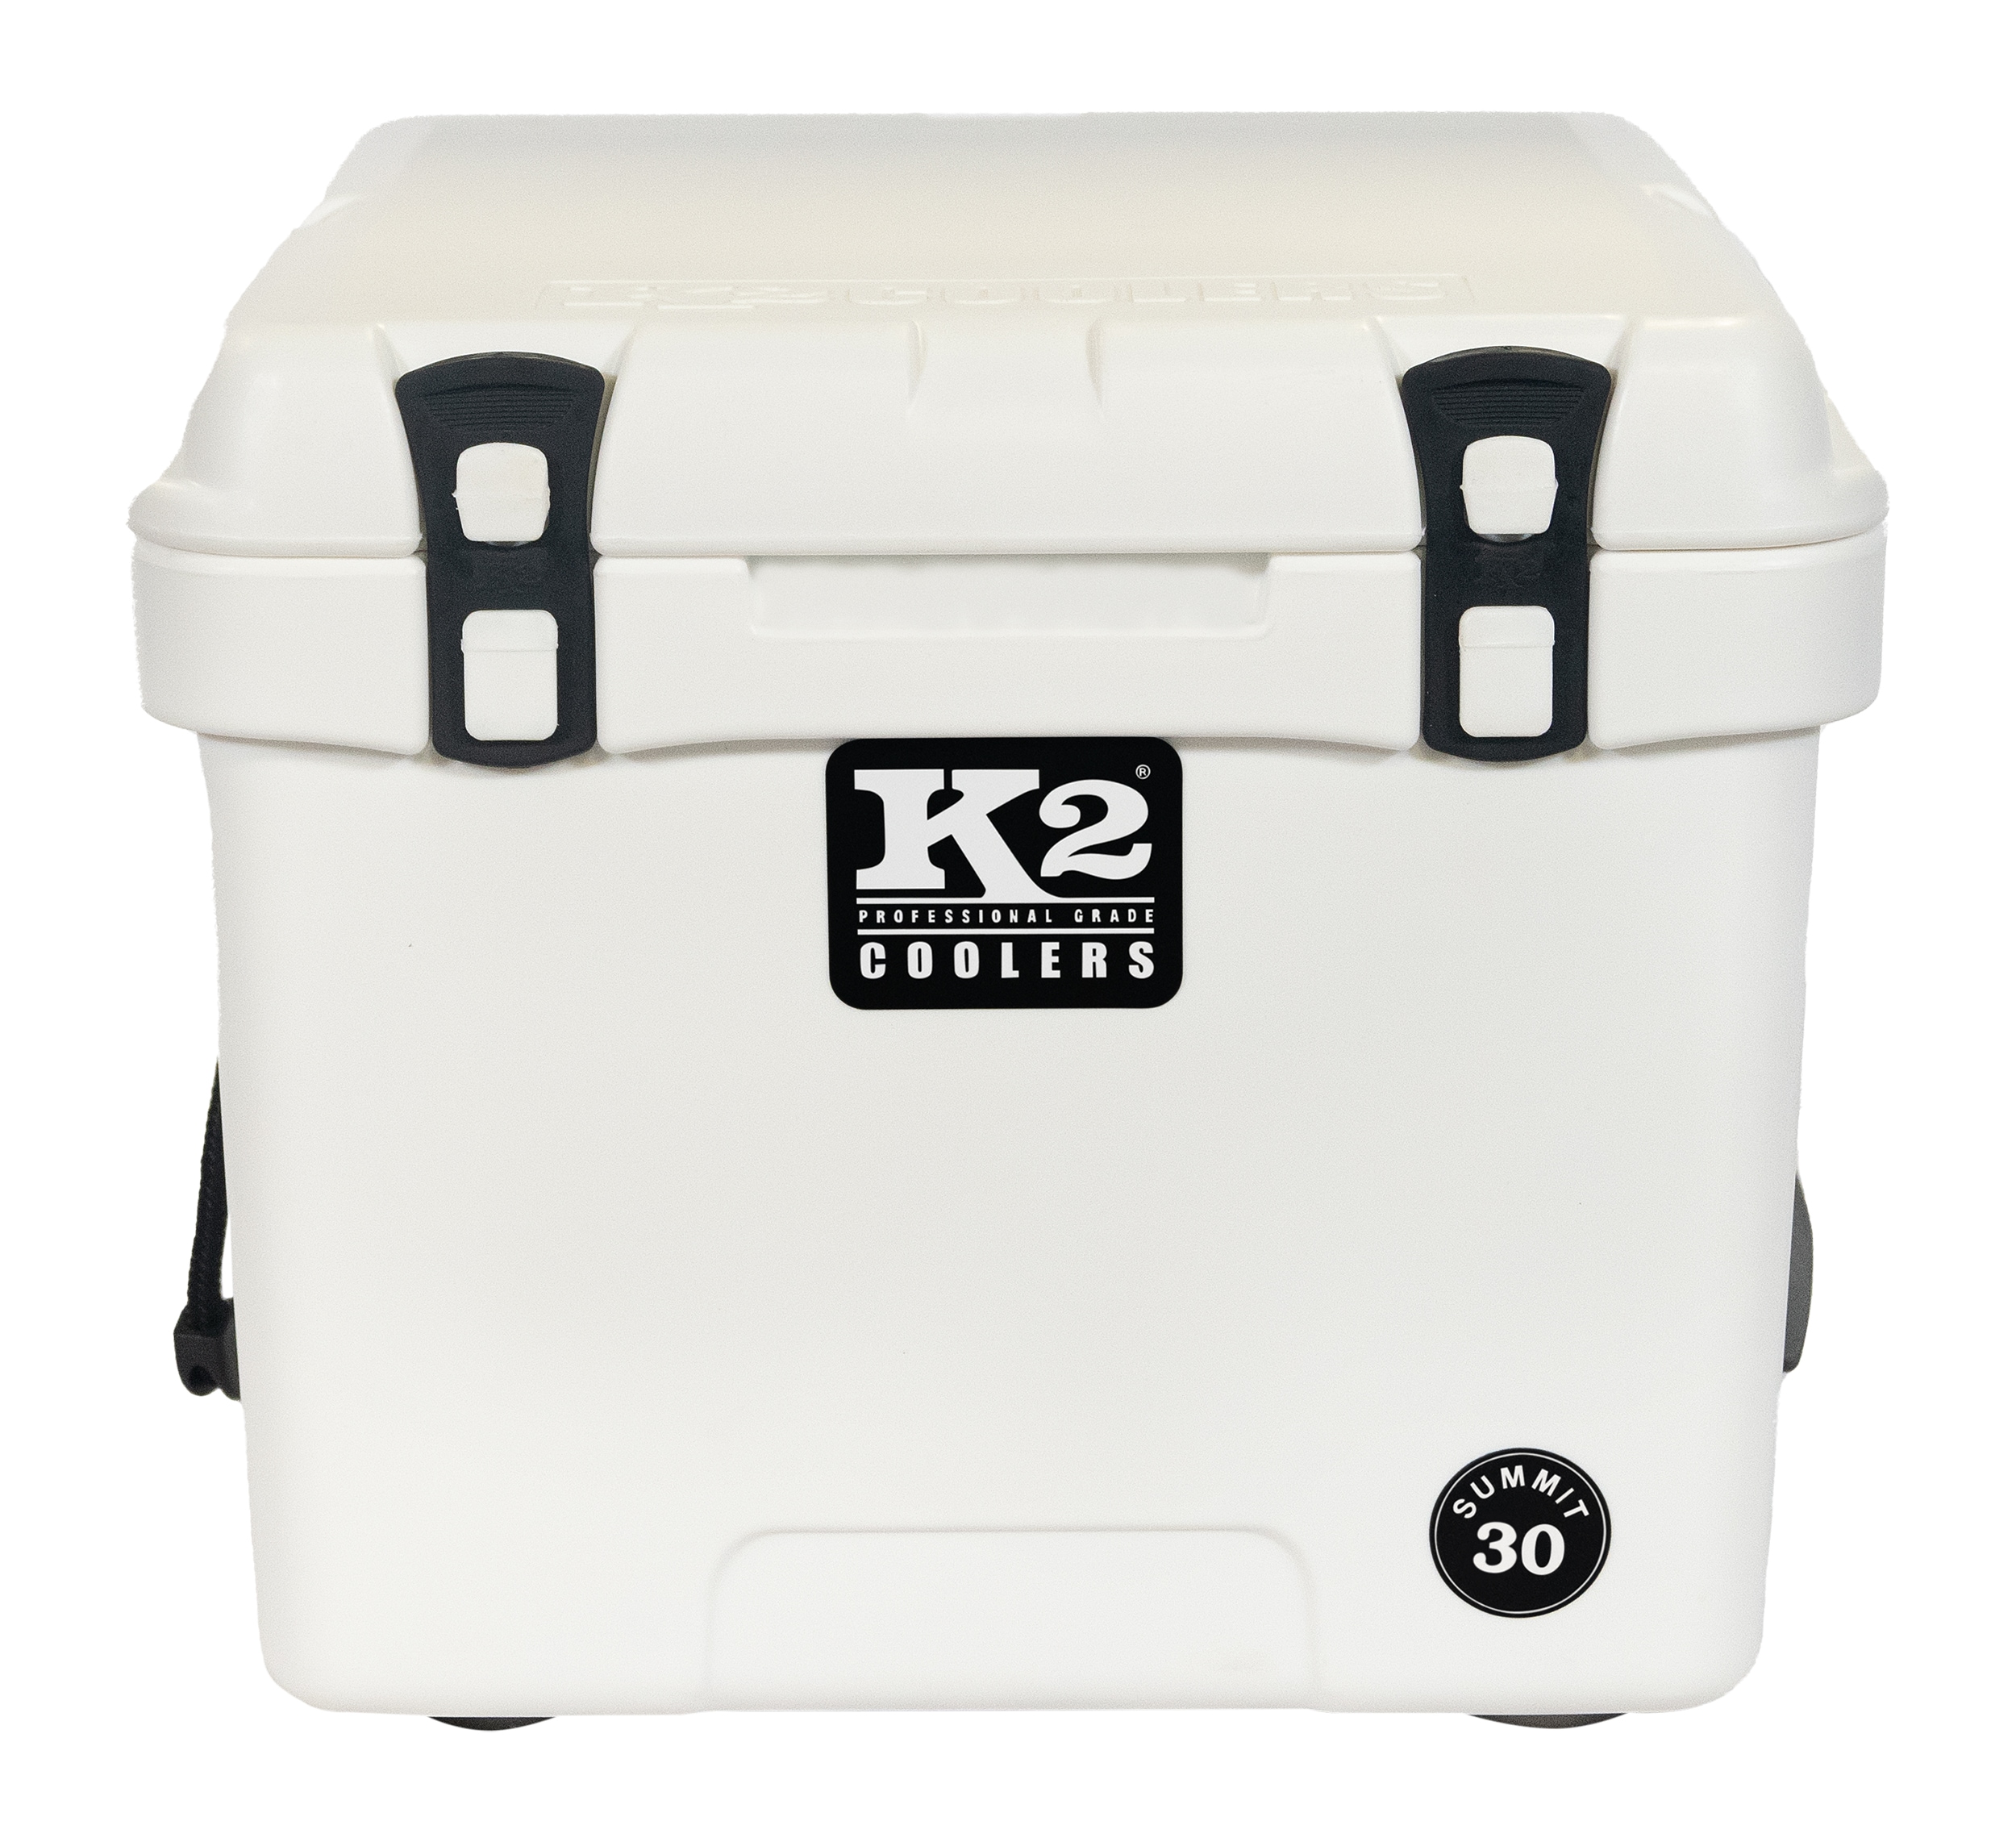 K2 Coolers S30W